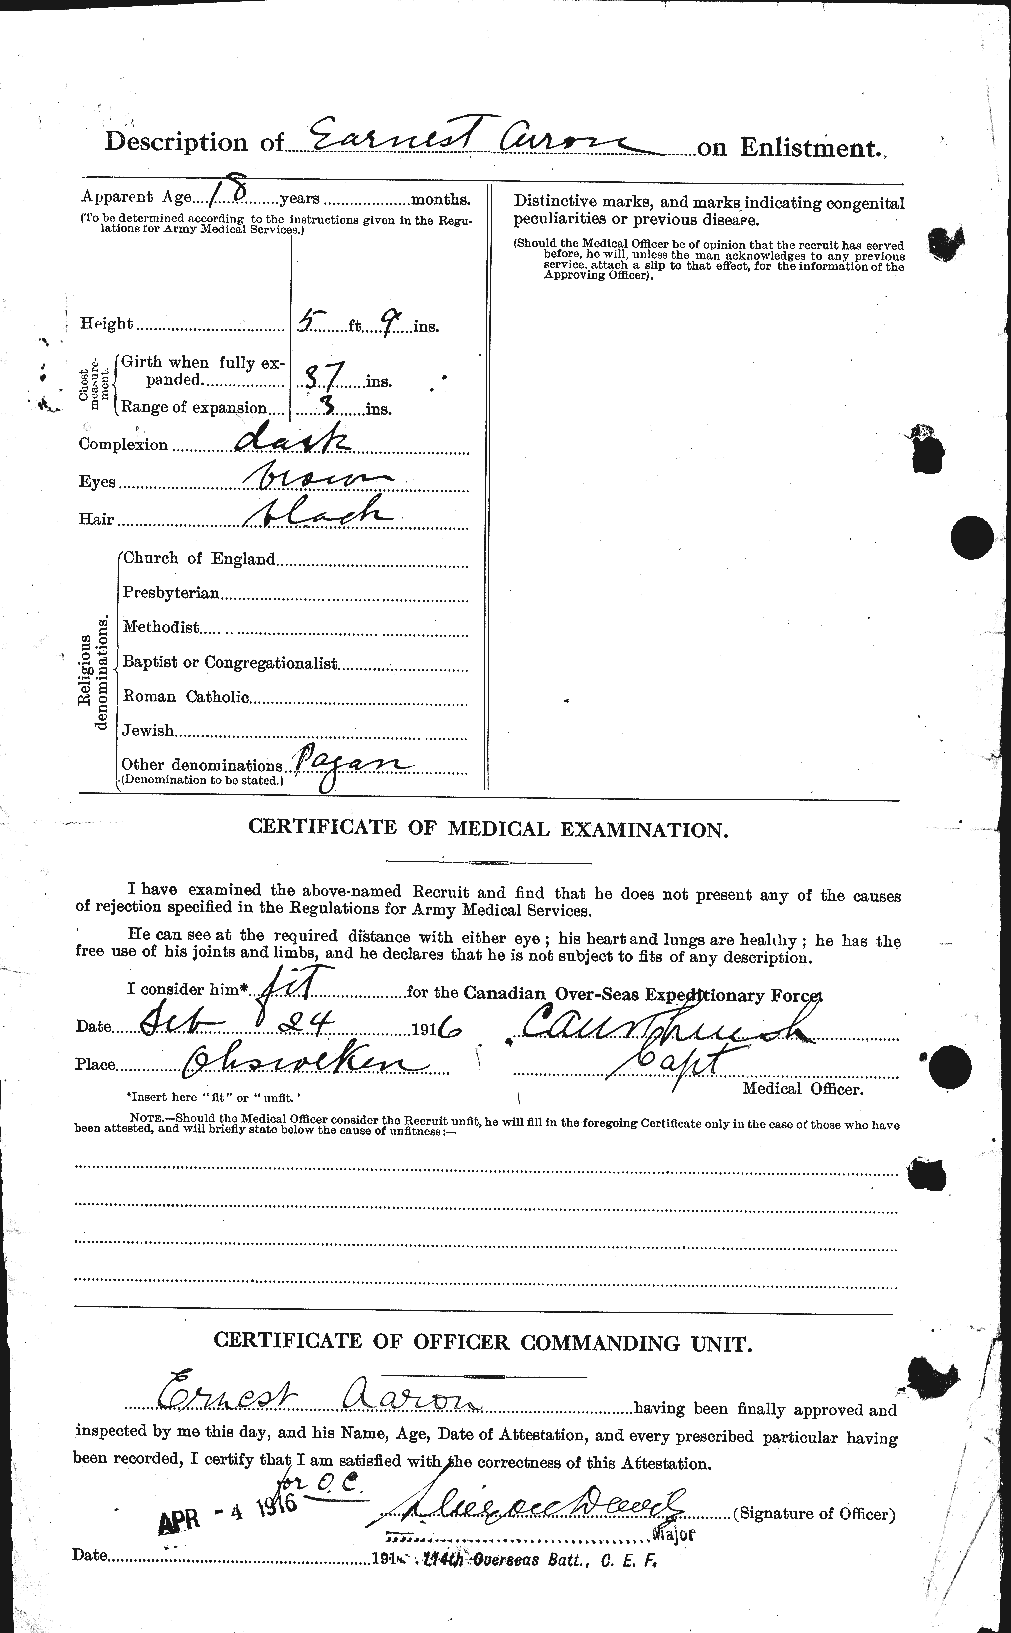 Personnel Records of the First World War - CEF 200739b